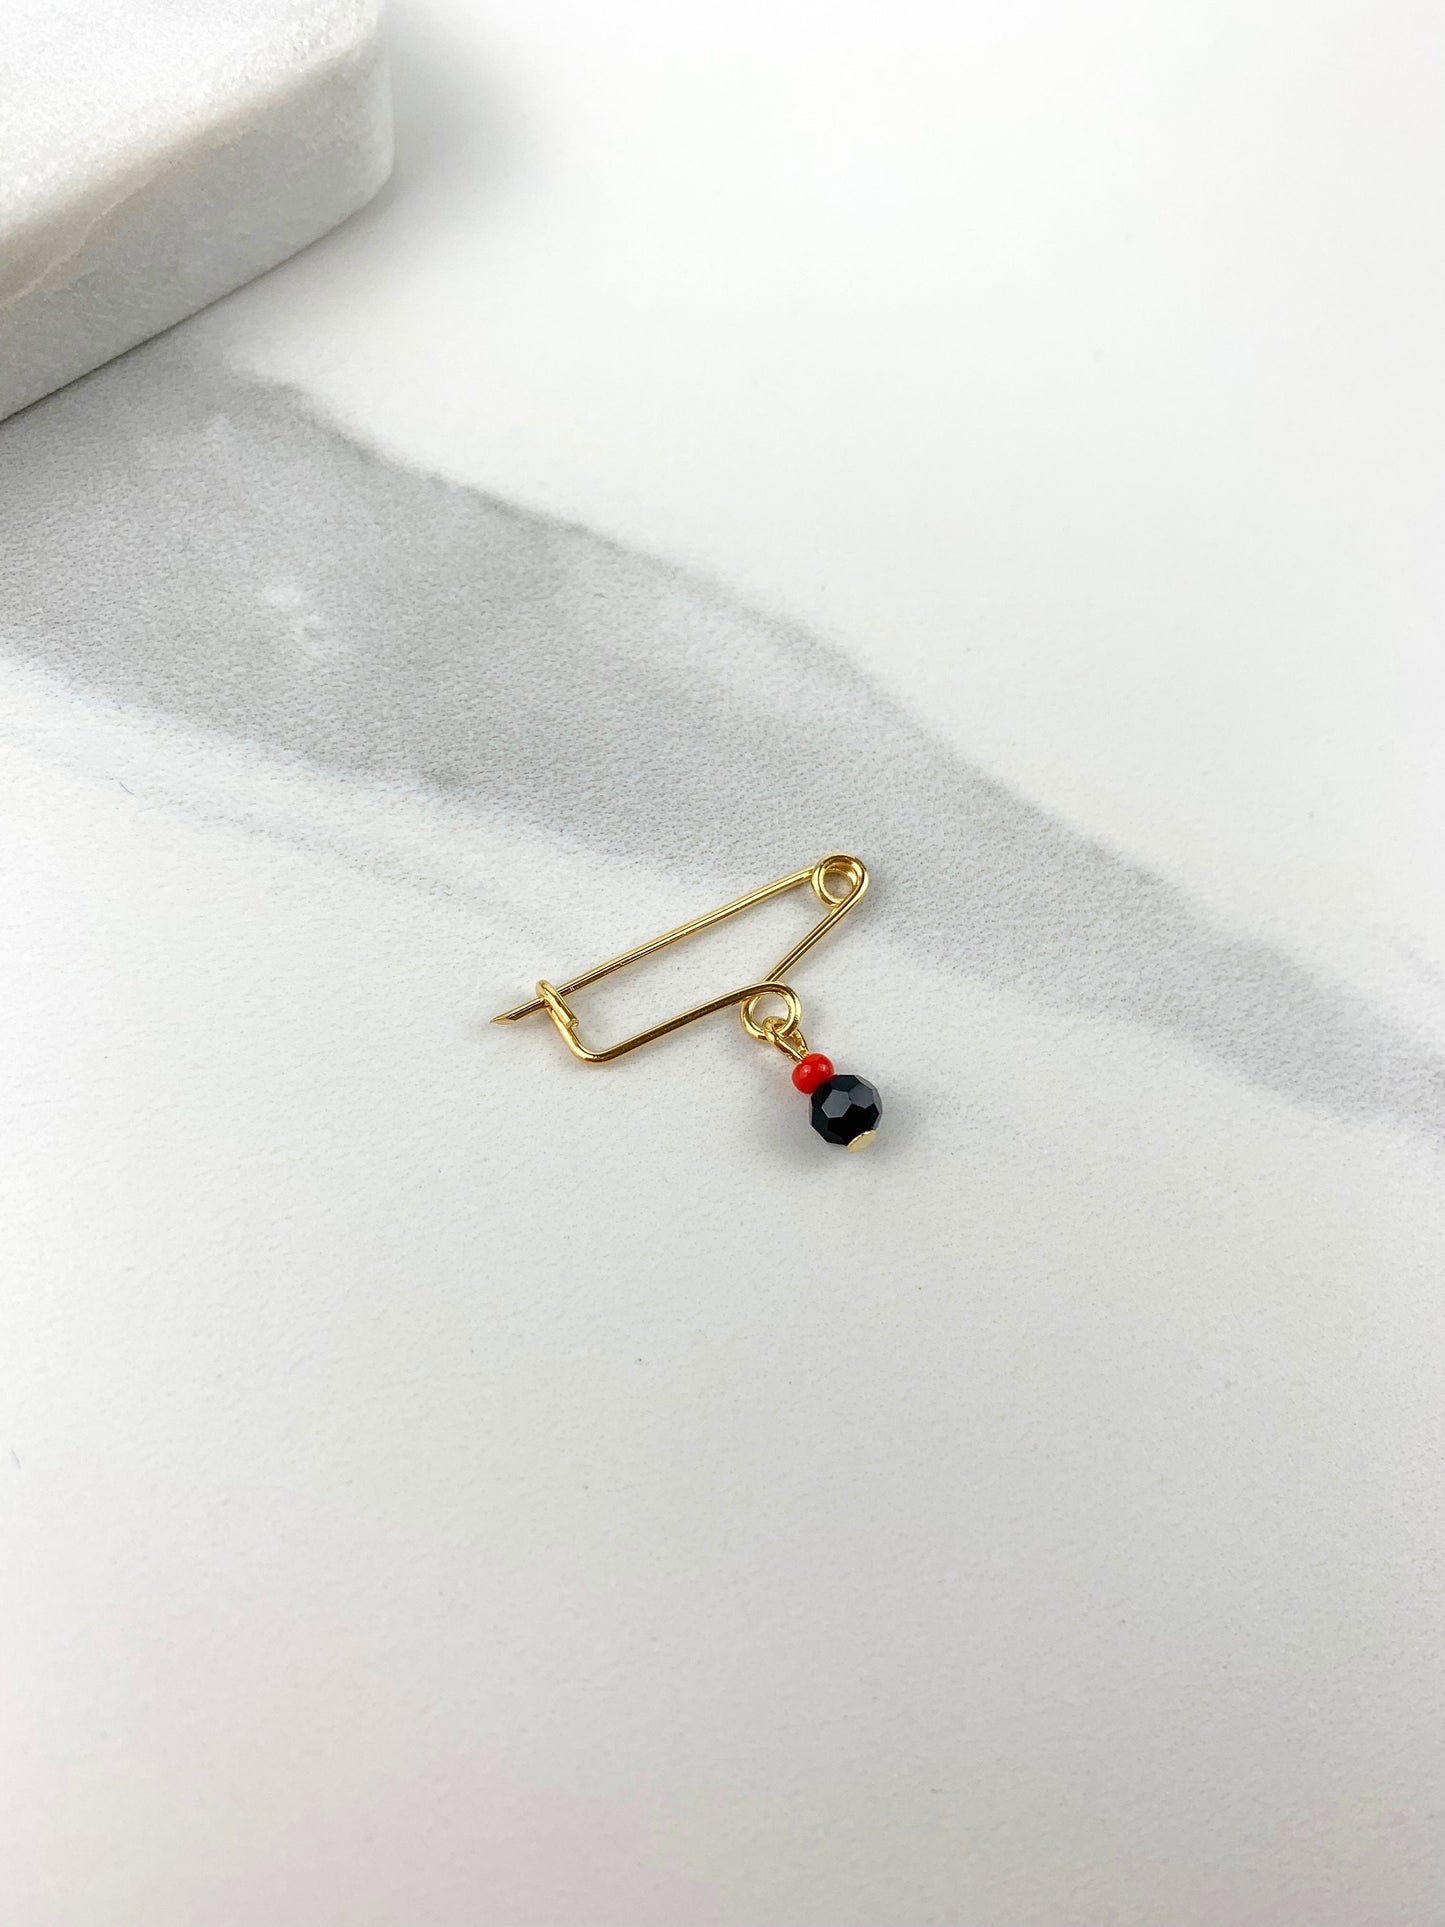 18k Gold Filled Fancy New Born Simulated Azabache Pin Charms Black Red, Baby Protection Jewelry Wholesale Jewelry Supplies